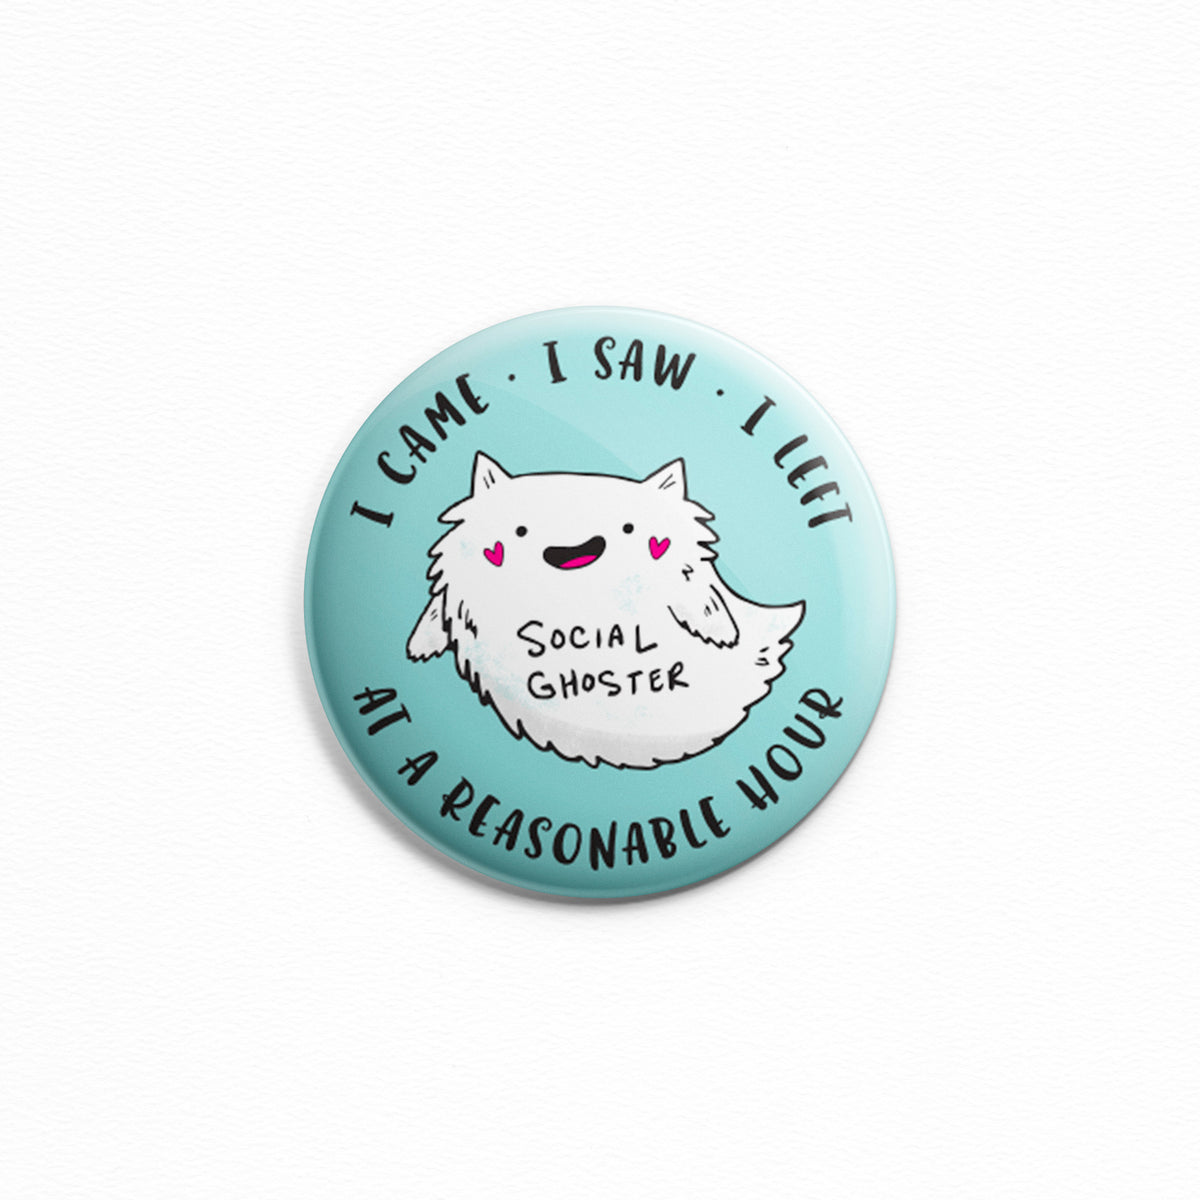 Social Ghoster - Button or magnet with an illustration of a introverting ghost cat.